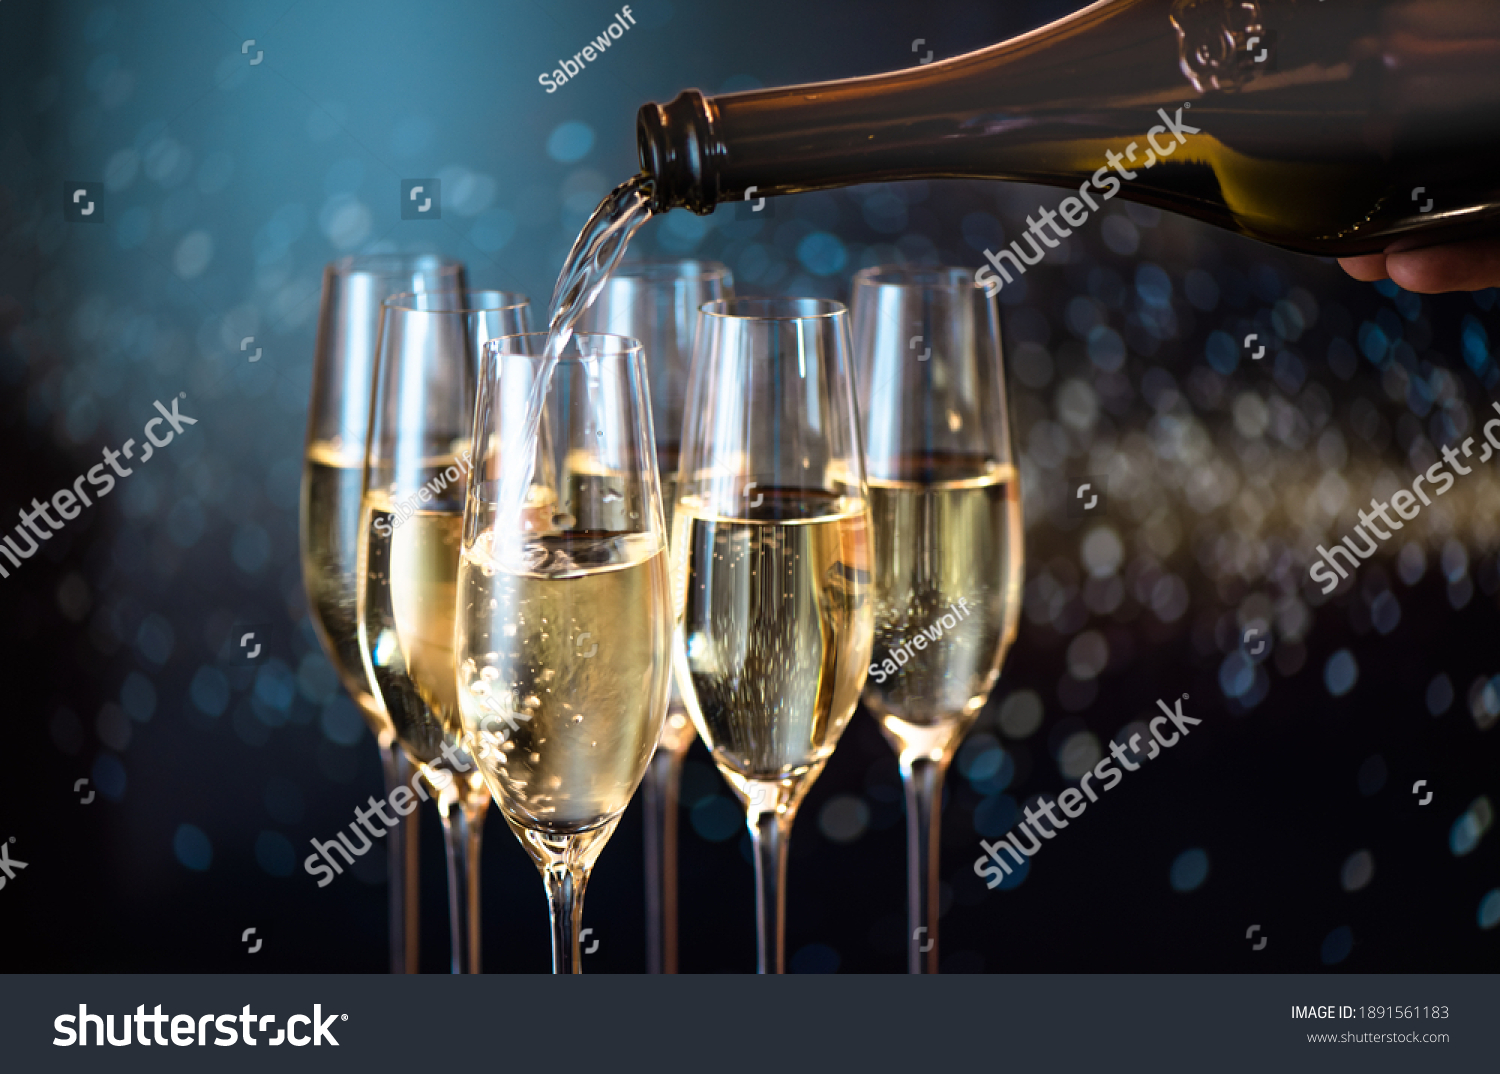 pouring champagne for a toast in a celebratory atmosphere with glasses of champagne  on golden flakes bokeh  background #1891561183